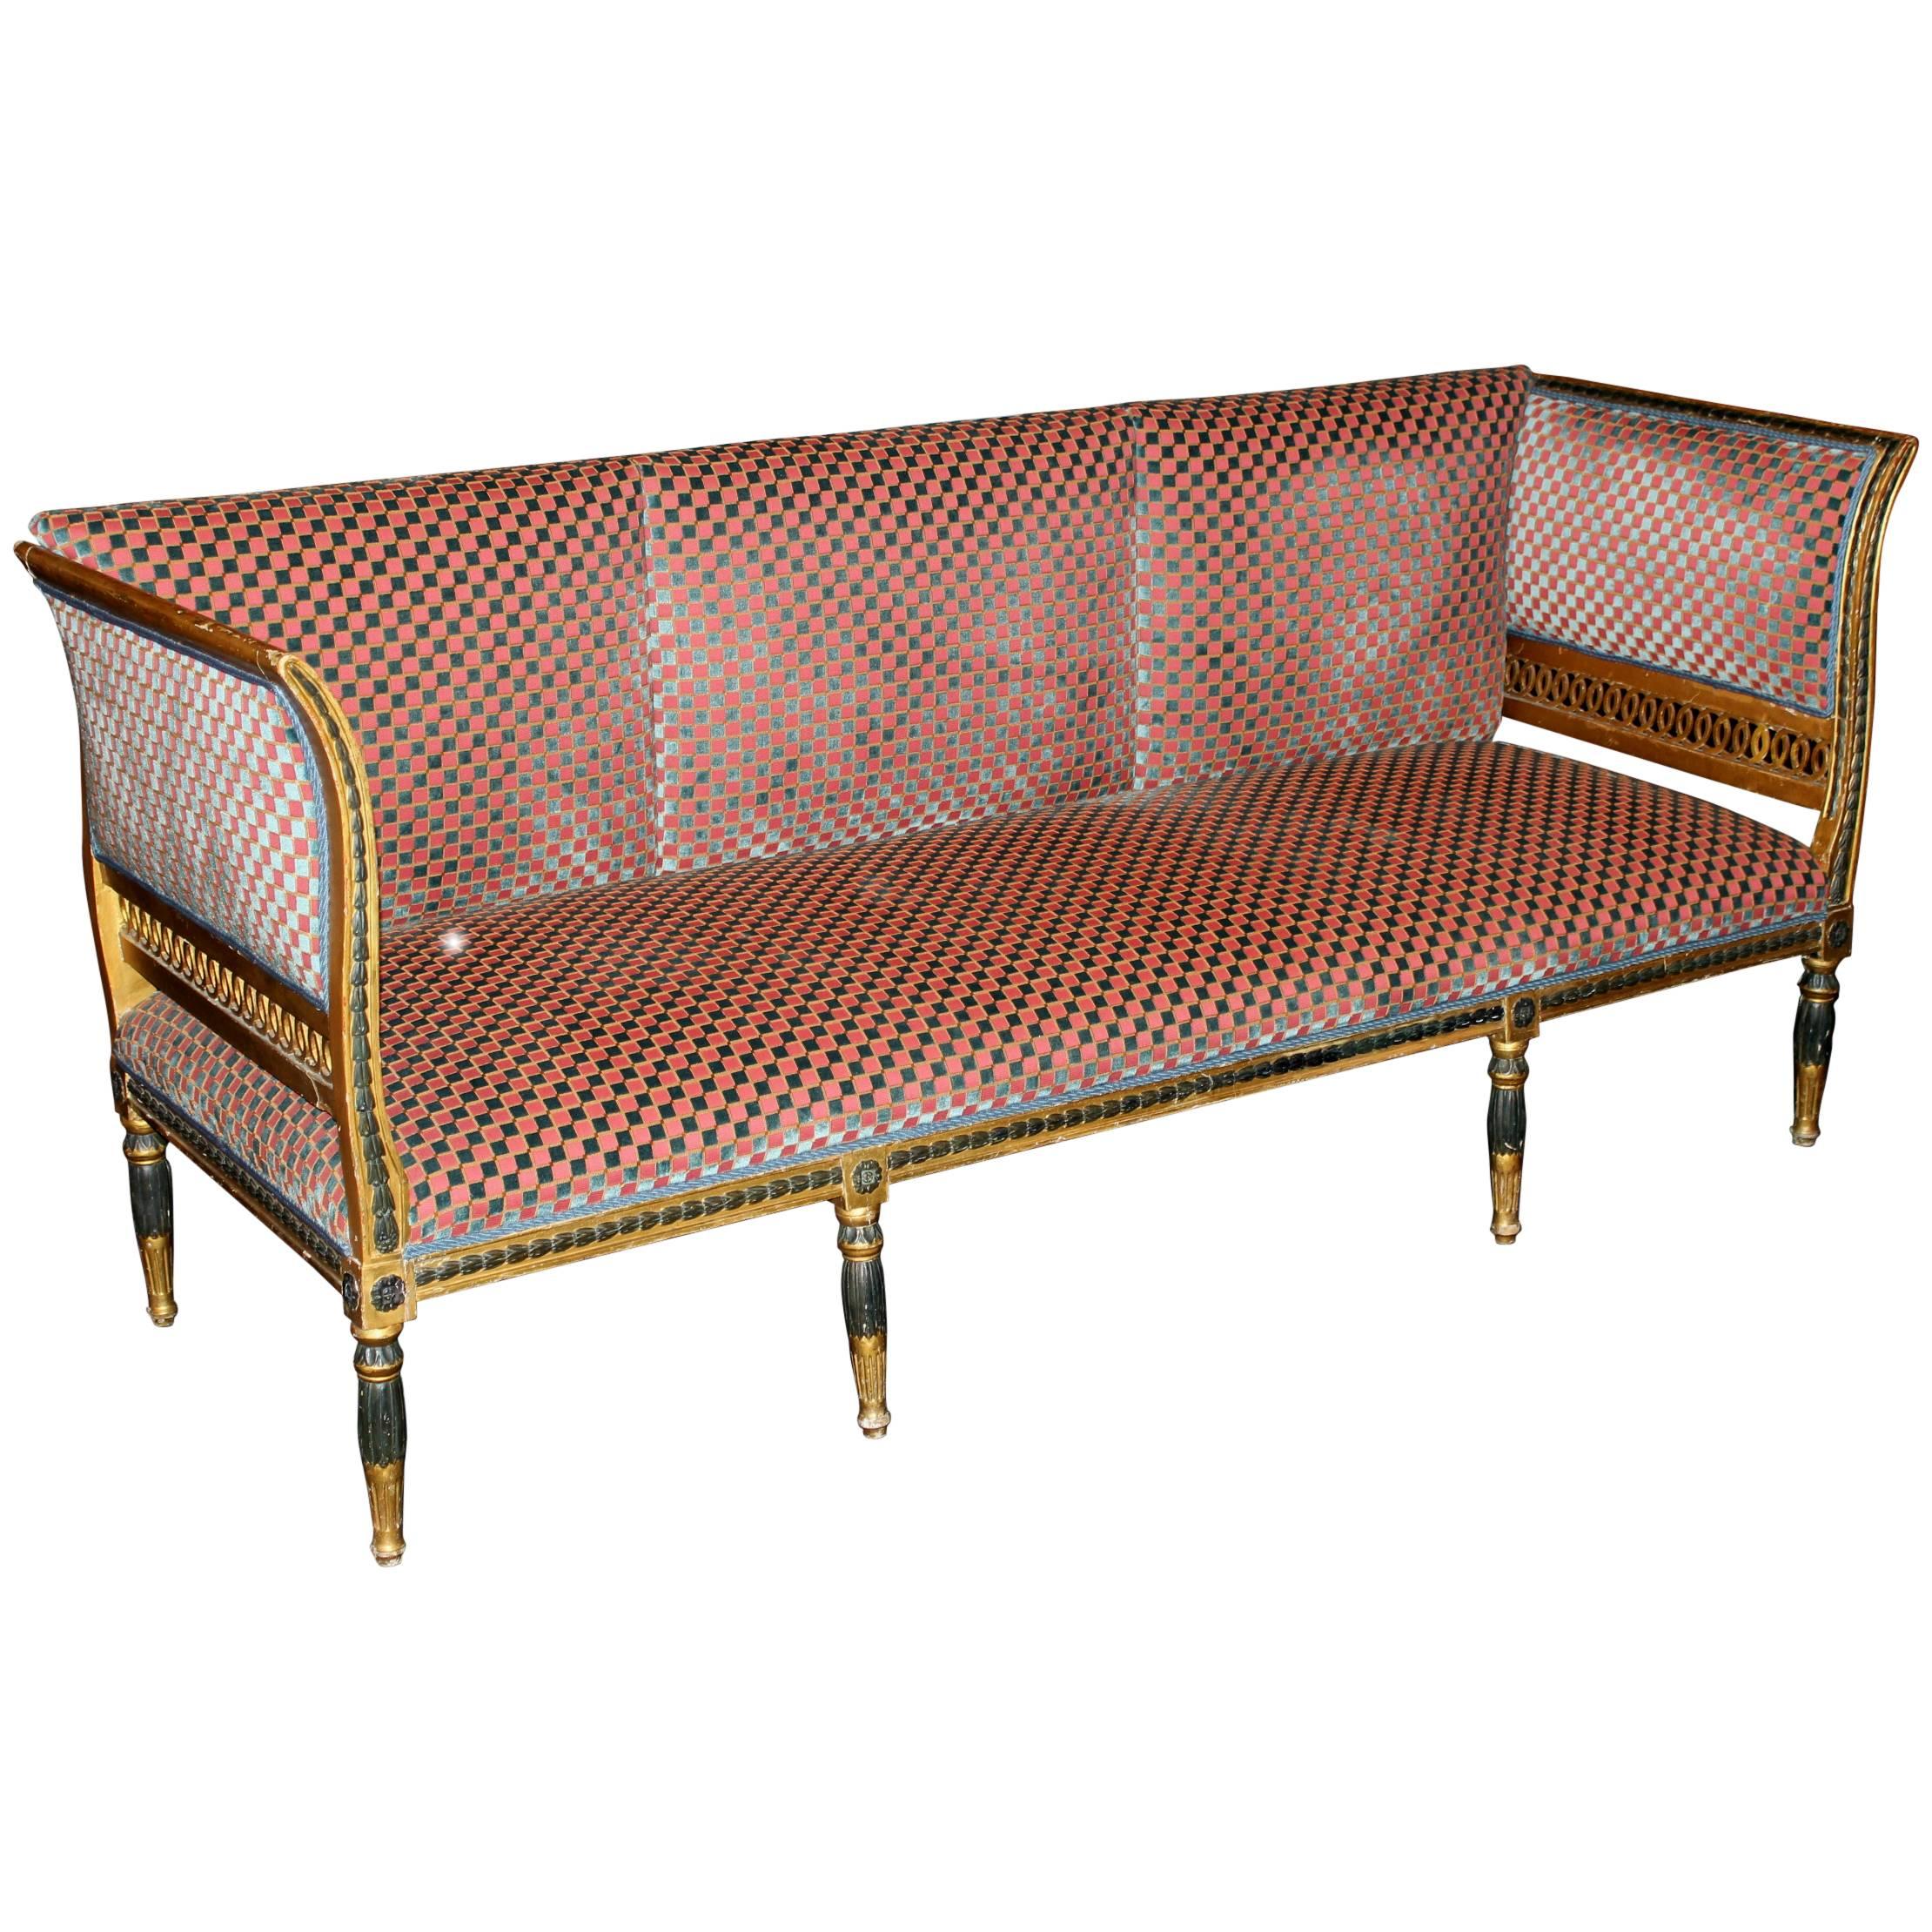 Gustavian Period Neoclassical Giltwood and Polychrome Sofa, circa 1800, Sweden